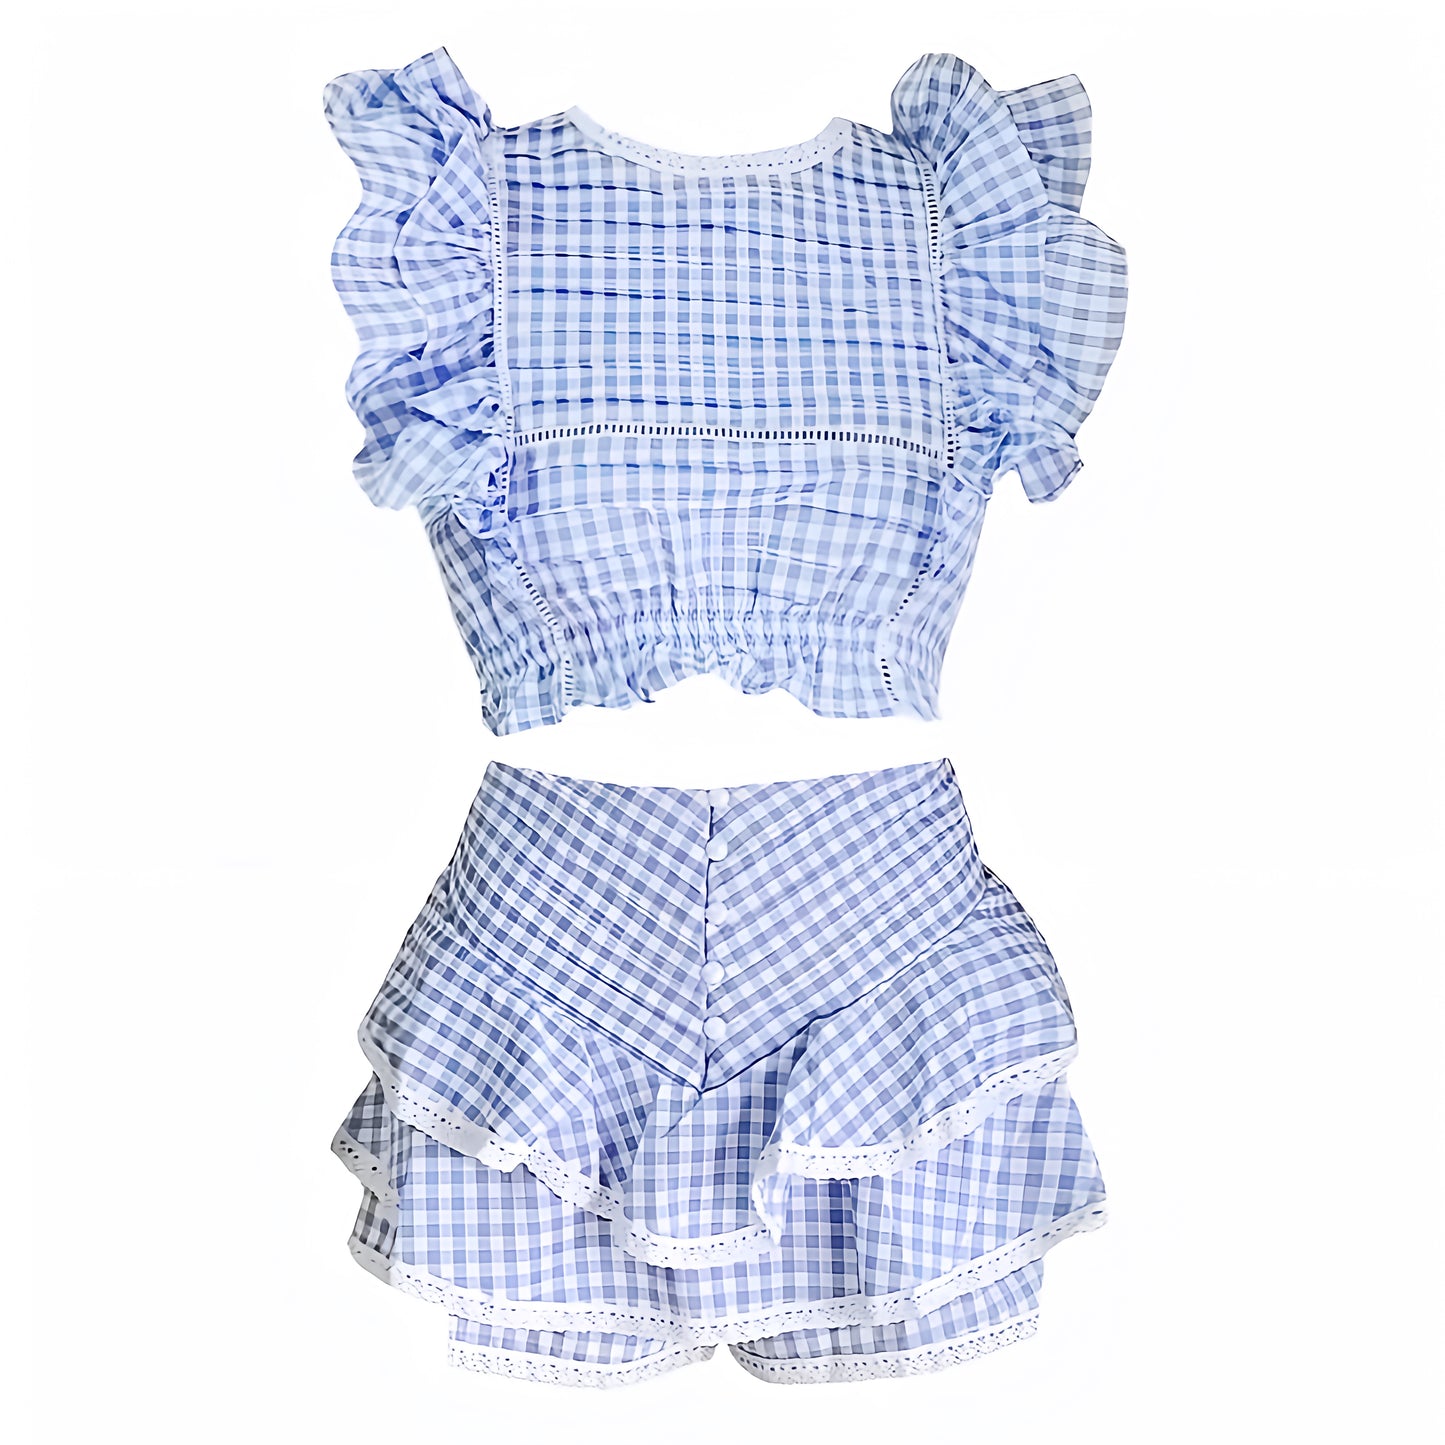 light-blue-white-gingham-checkered-plaid-striped-print-patterned-lace-embroidered-layered-ruffle-trim-slim-fitted-bodycon-fit-flare-round-neckline-short-puff-sleeve-top-blouse-and-mid-high-rise-mini-skirt-skort-two-piece-set-dress-women-ladies-chic-trendy-spring-2024-summer-elegant-casual-classy-semi-formal-feminine-prom-gala-preppy-style-wedding-guest-debutante-party-beach-wear-coastal-granddaughter-sundress-altard-state-revolve-loveshackfancy-hill-house-dupe